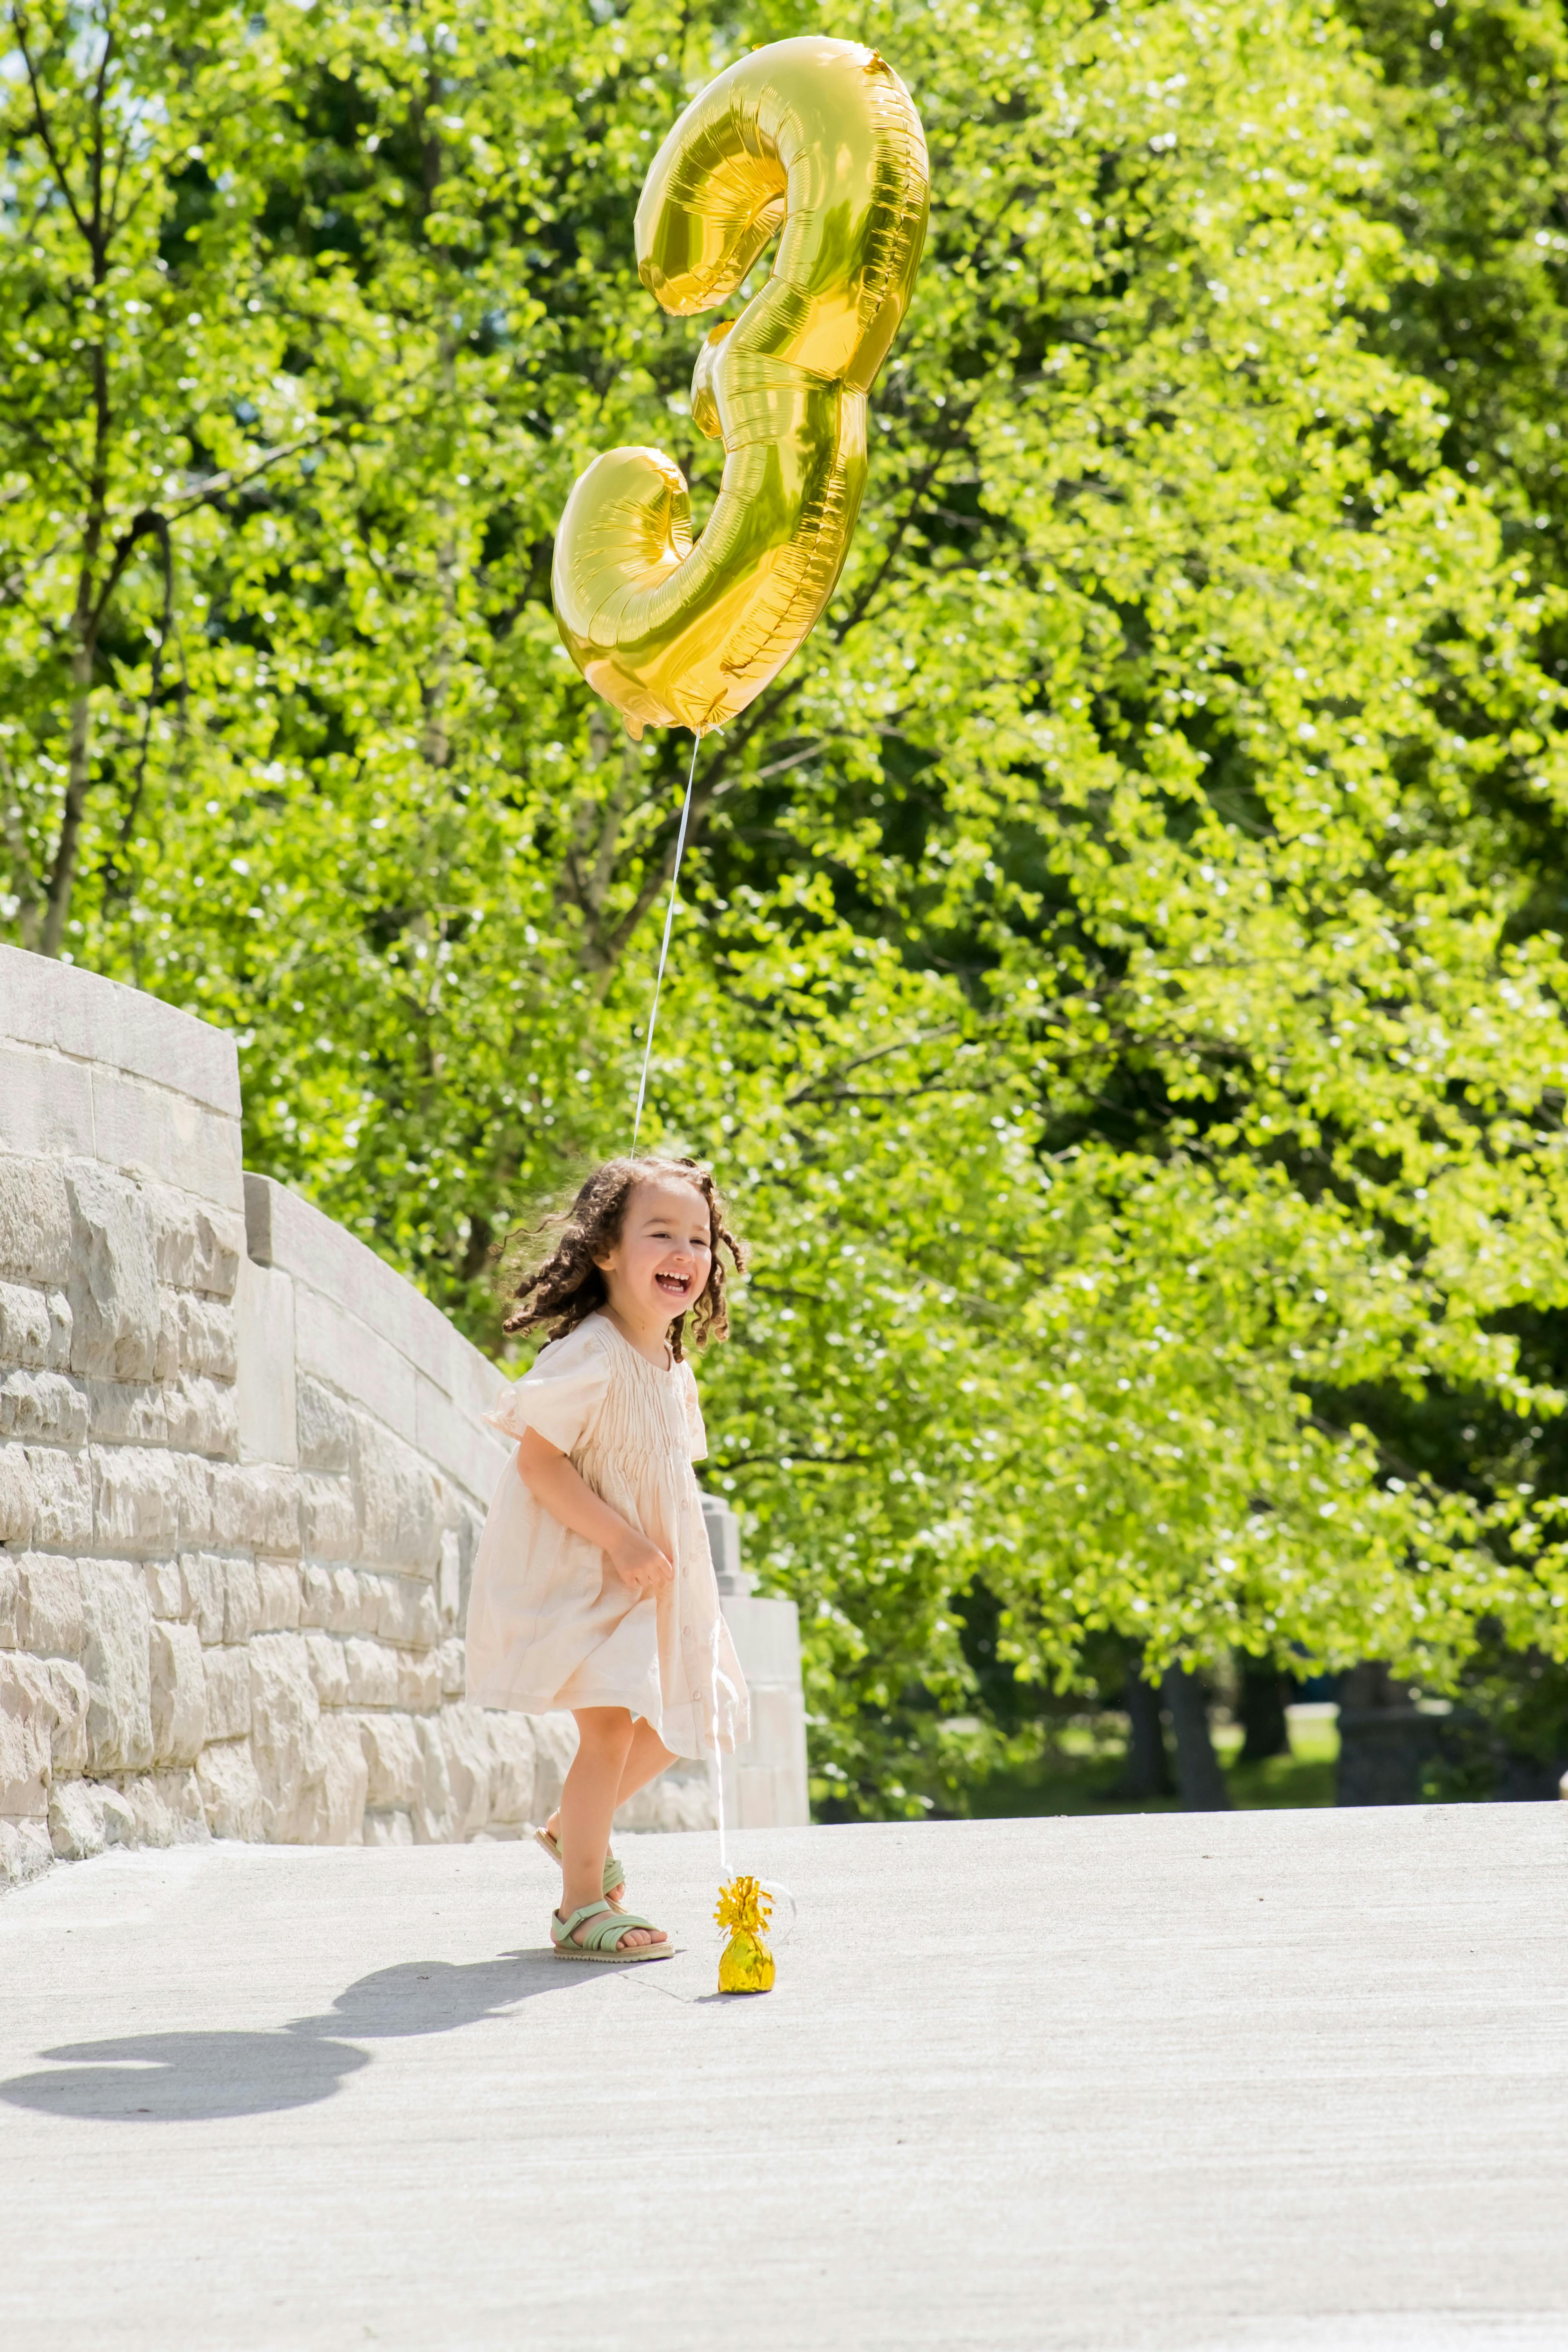 A young child happily holding a number 3 shaped balloon outdoors with a sunny green background.